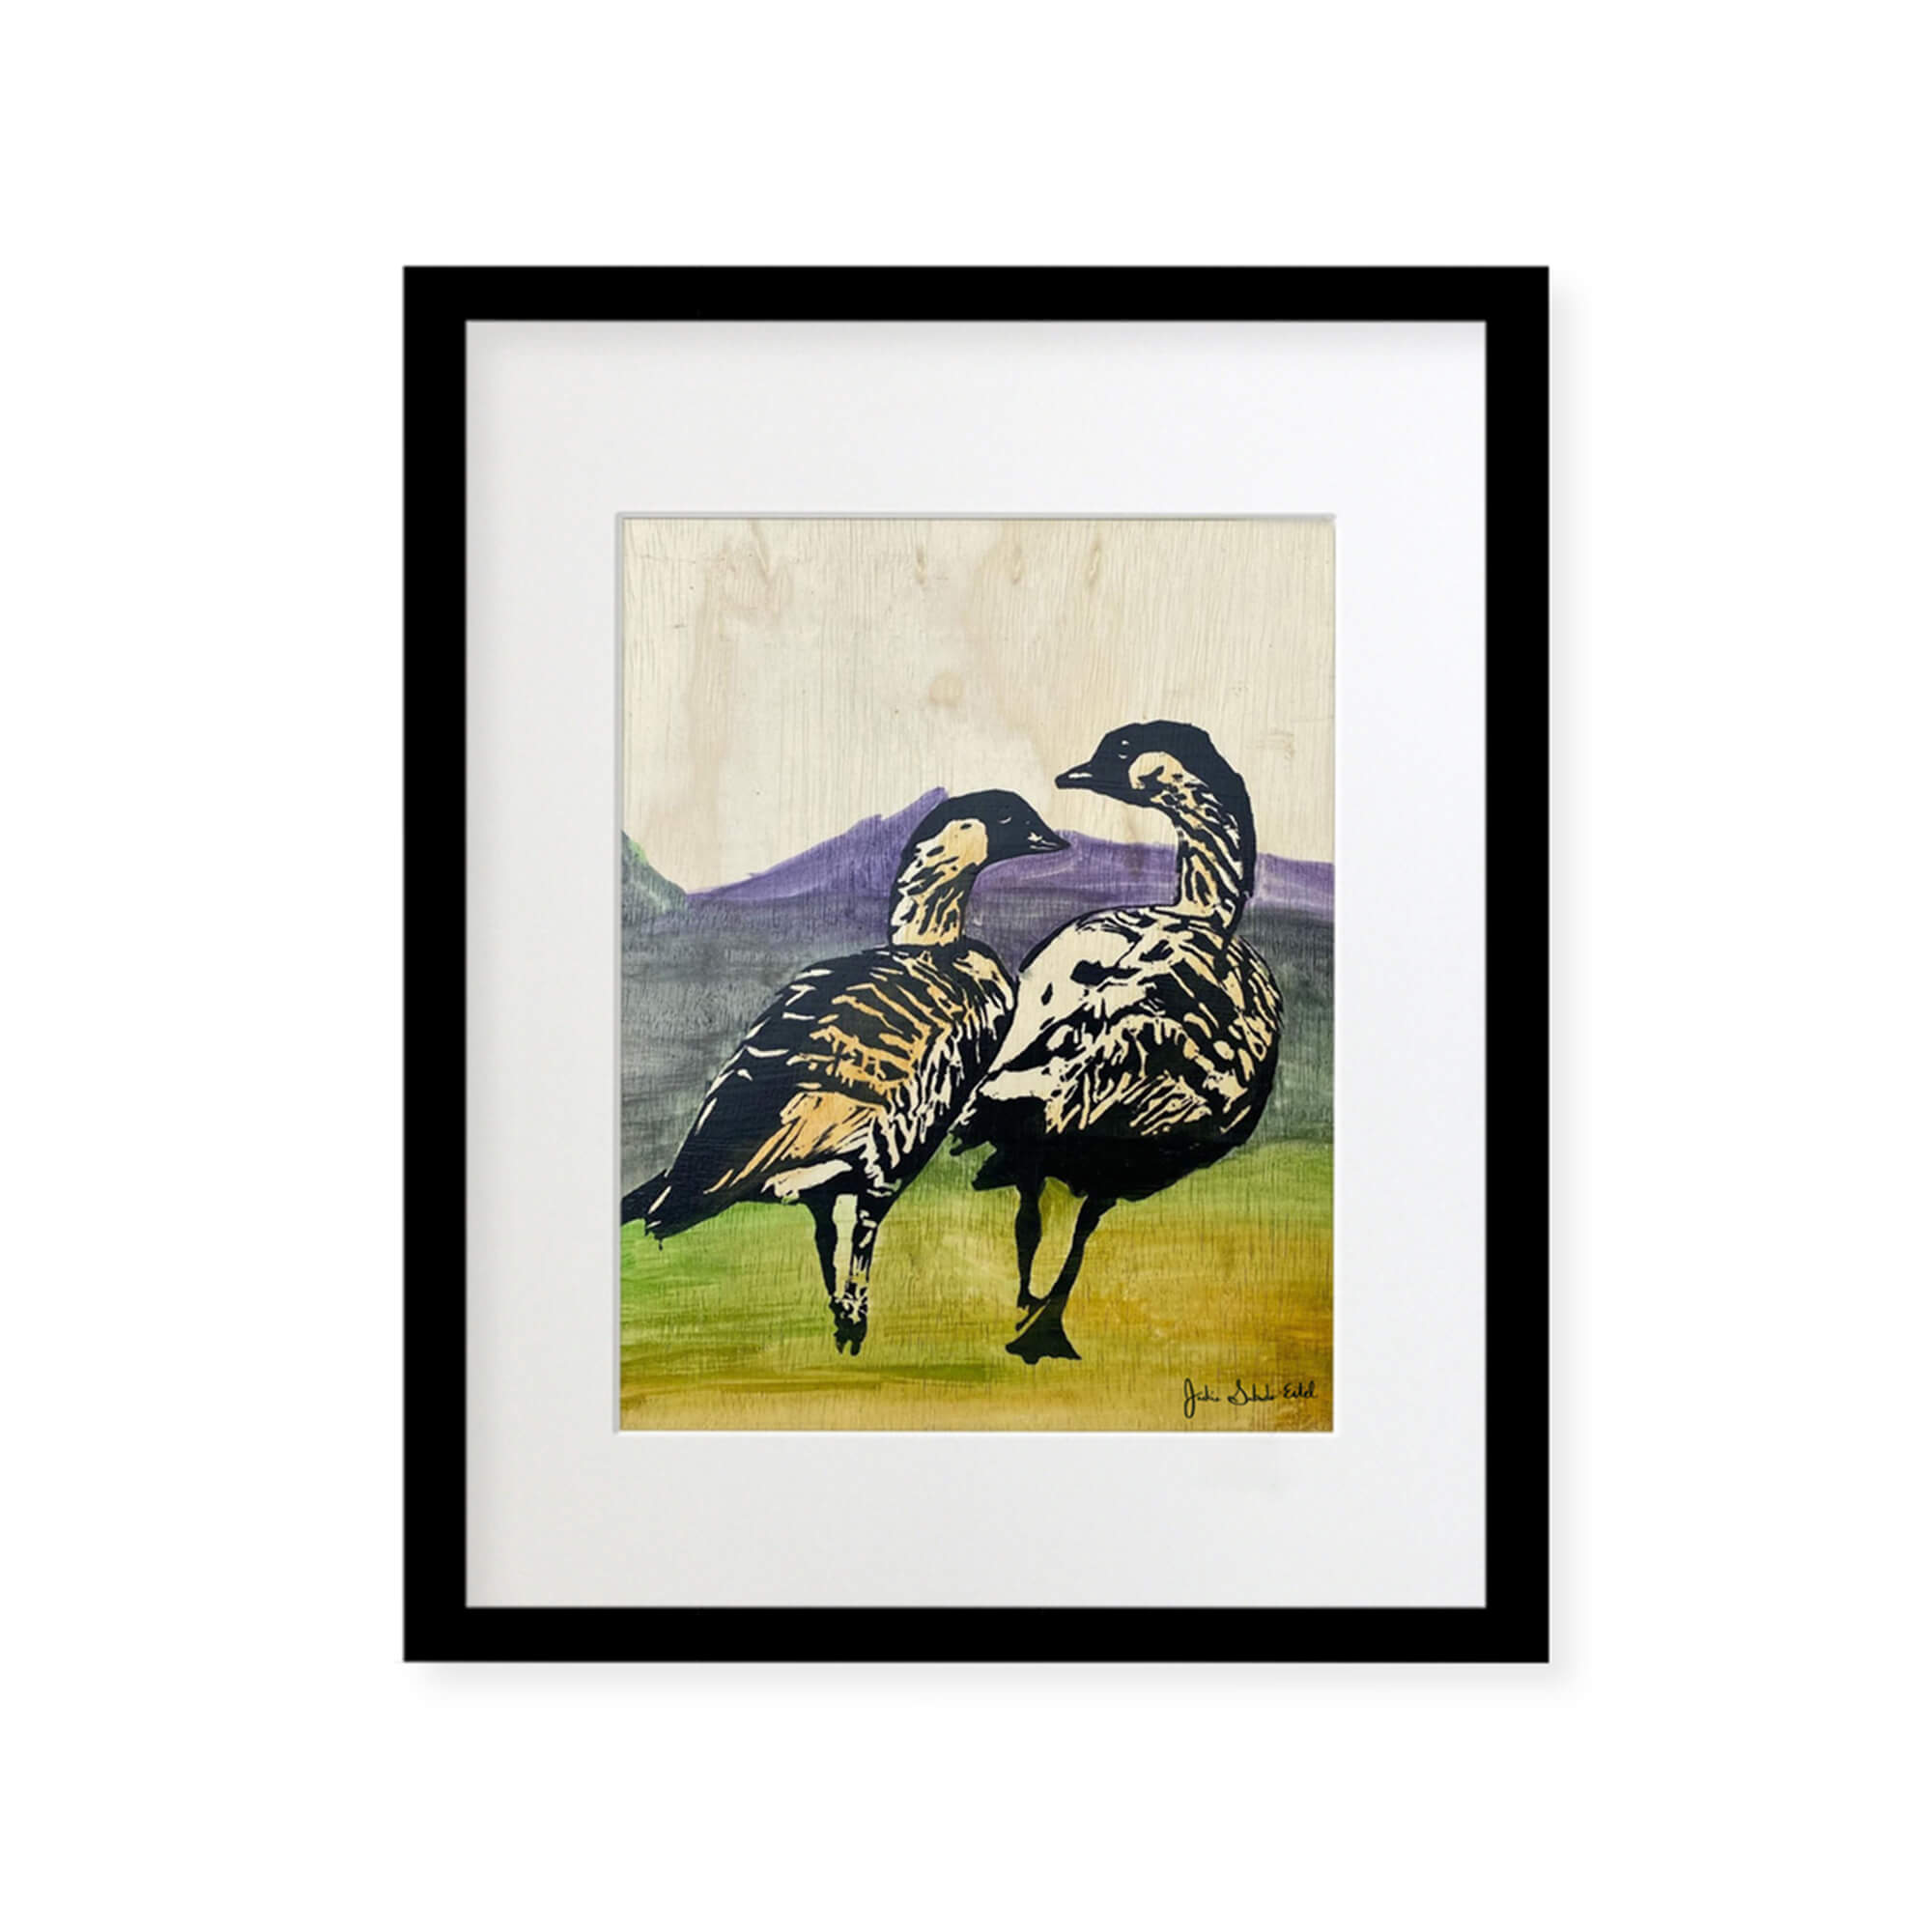 A framed matted art print featuring two ducks walking while enjoying the colorful landscapes of Hawaii by Hawaii artist Jackie Eitel